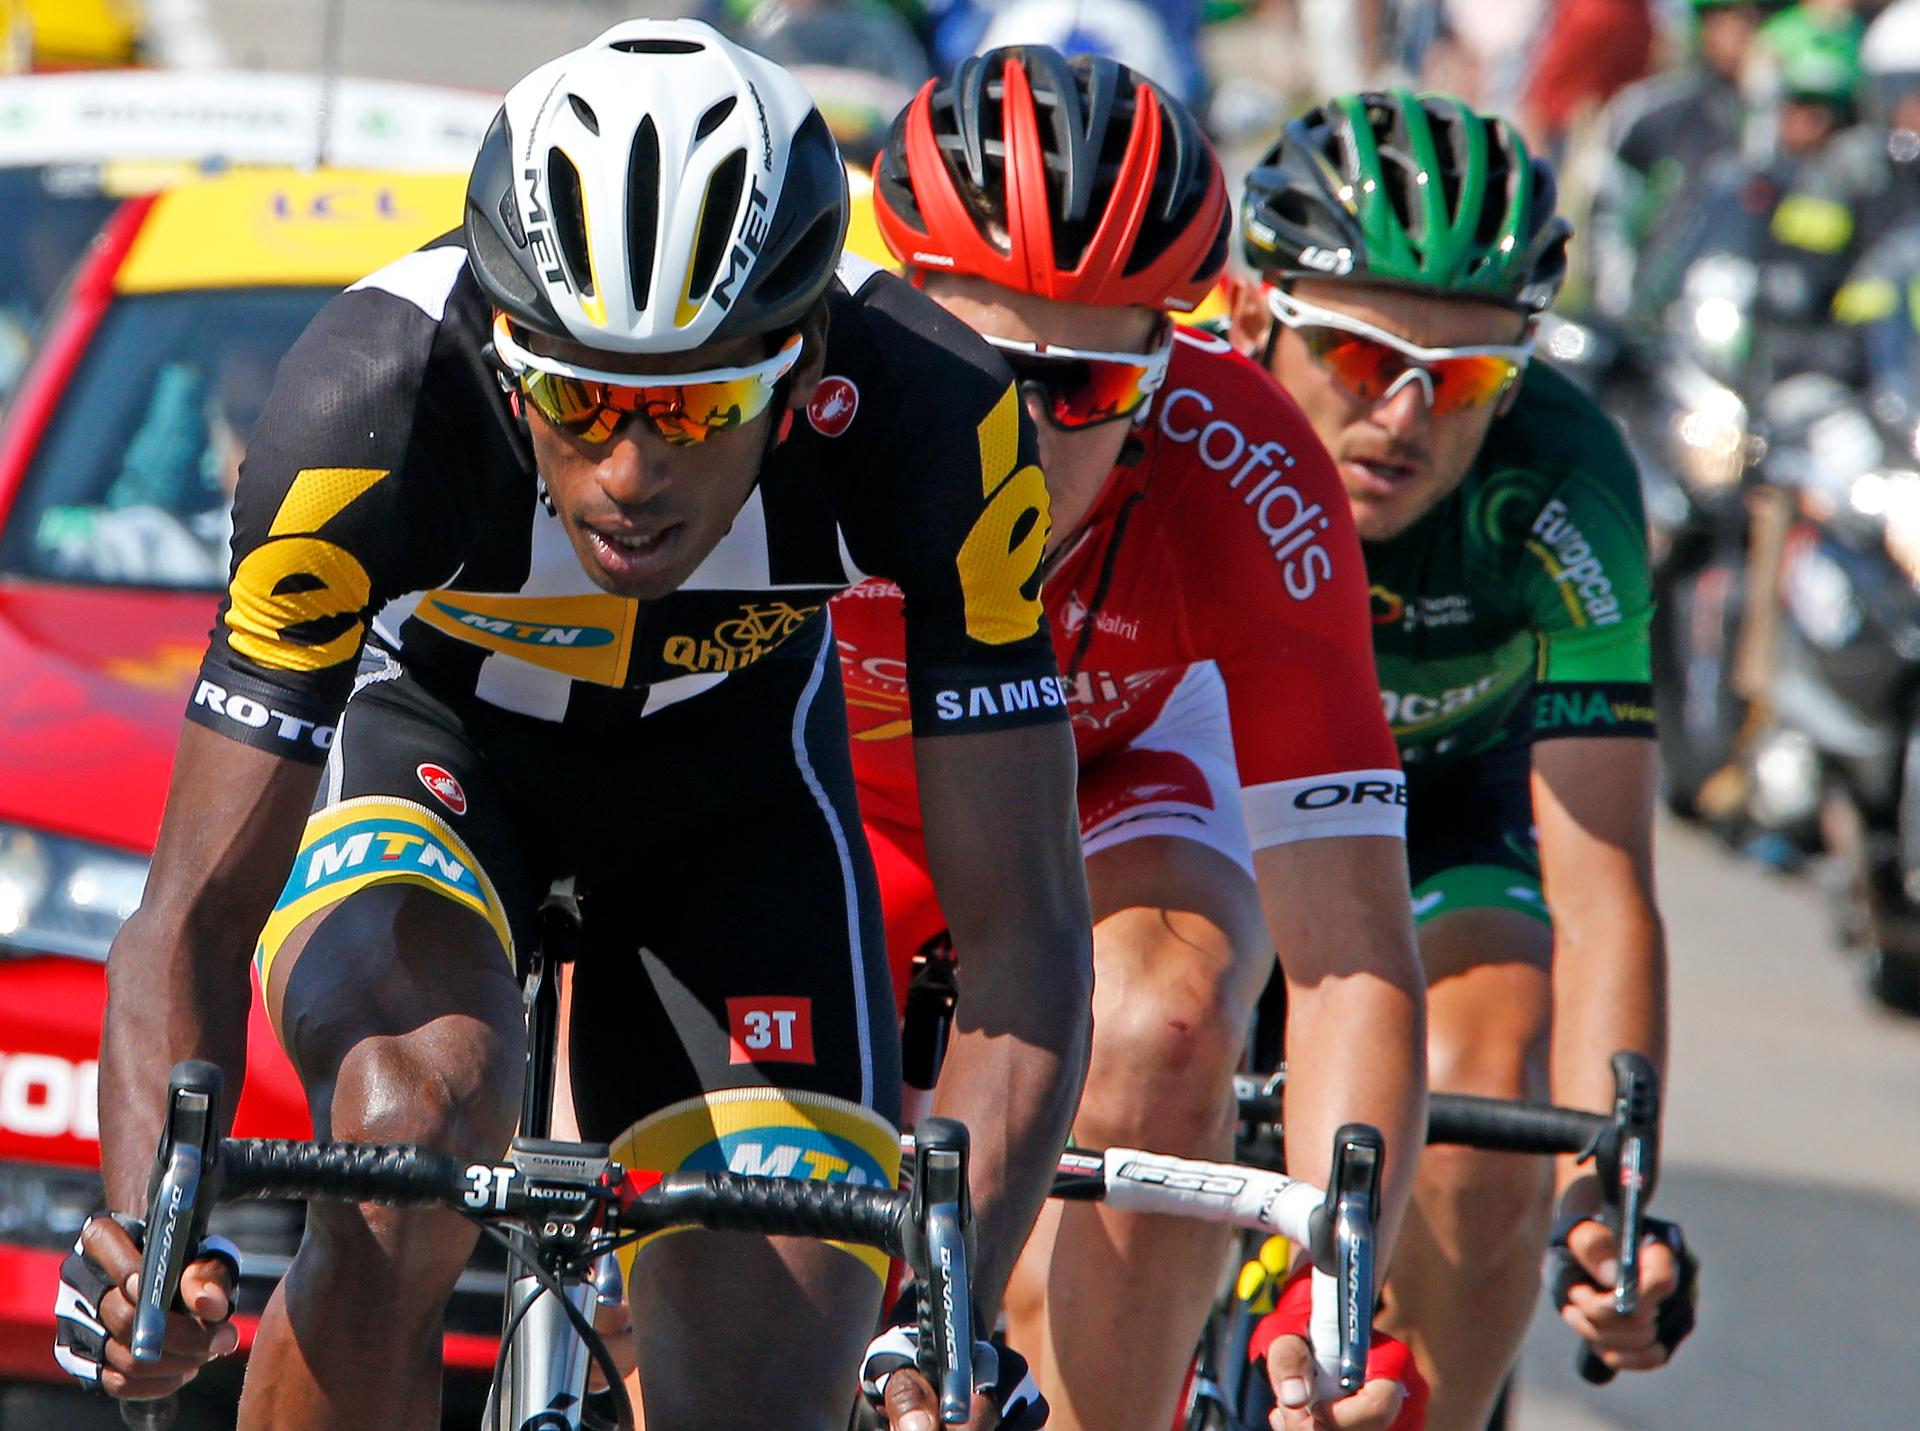 MTN-Qhubeka rider Daniel Teklehaimanot of Eritrea (L) wtih two racers on his tail during a break away in the 6th stage of the Tour de France.